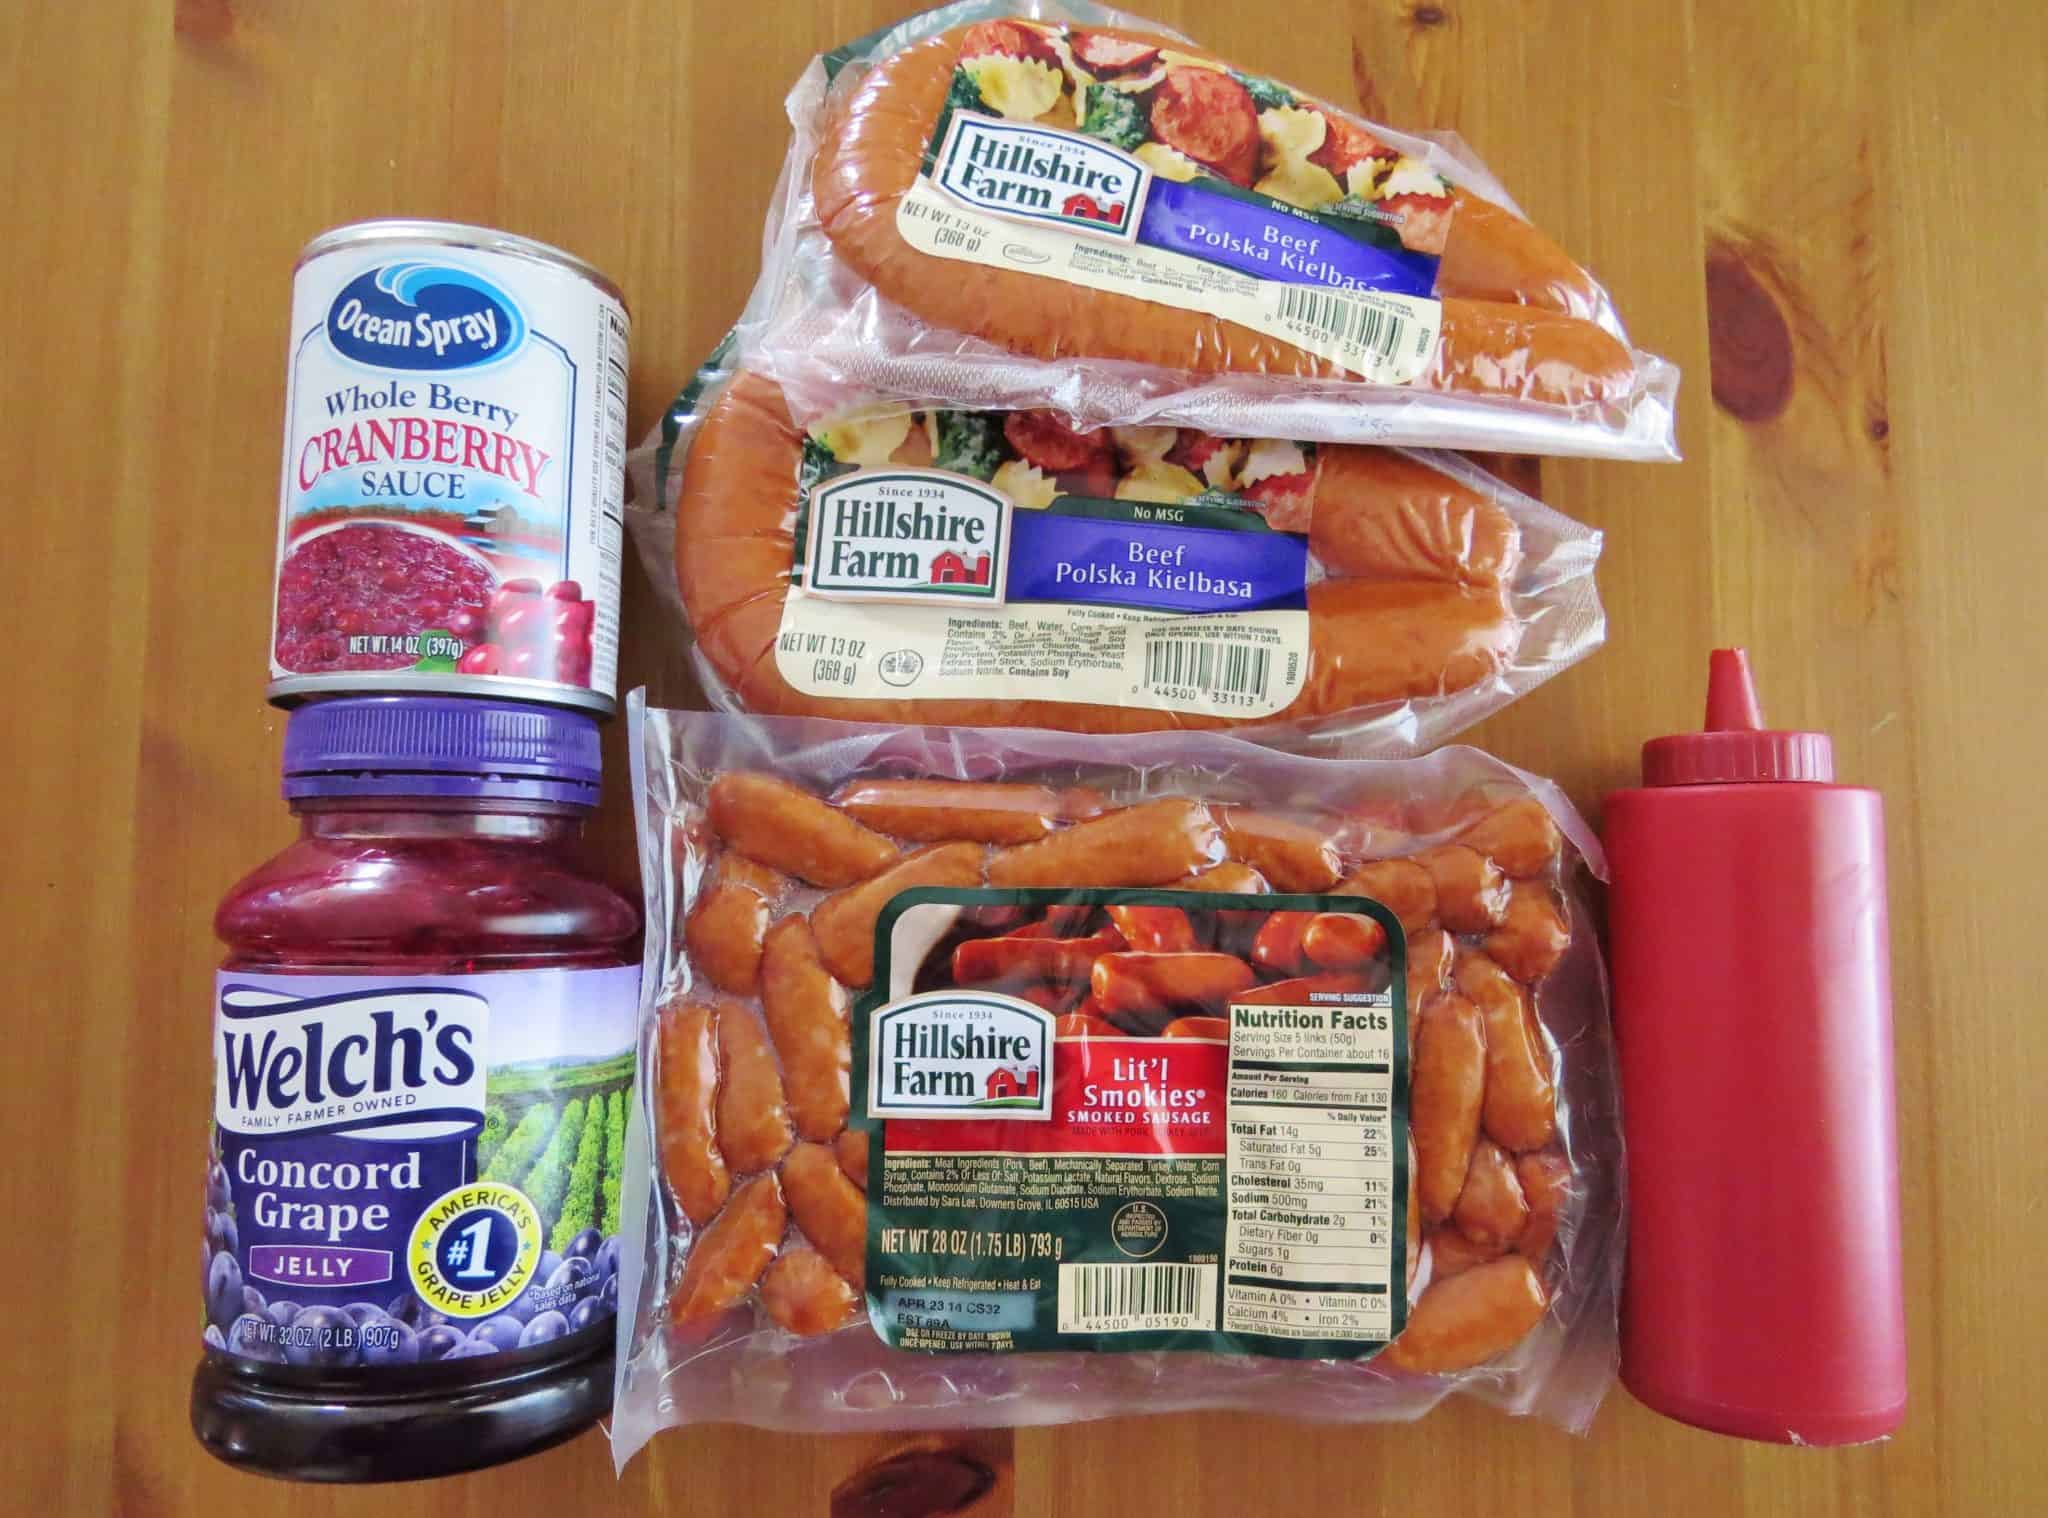 ingredients needed: Kielbasa, mini smoked sausages, ketchup, grape jelly, whole berry cranberry sauce.